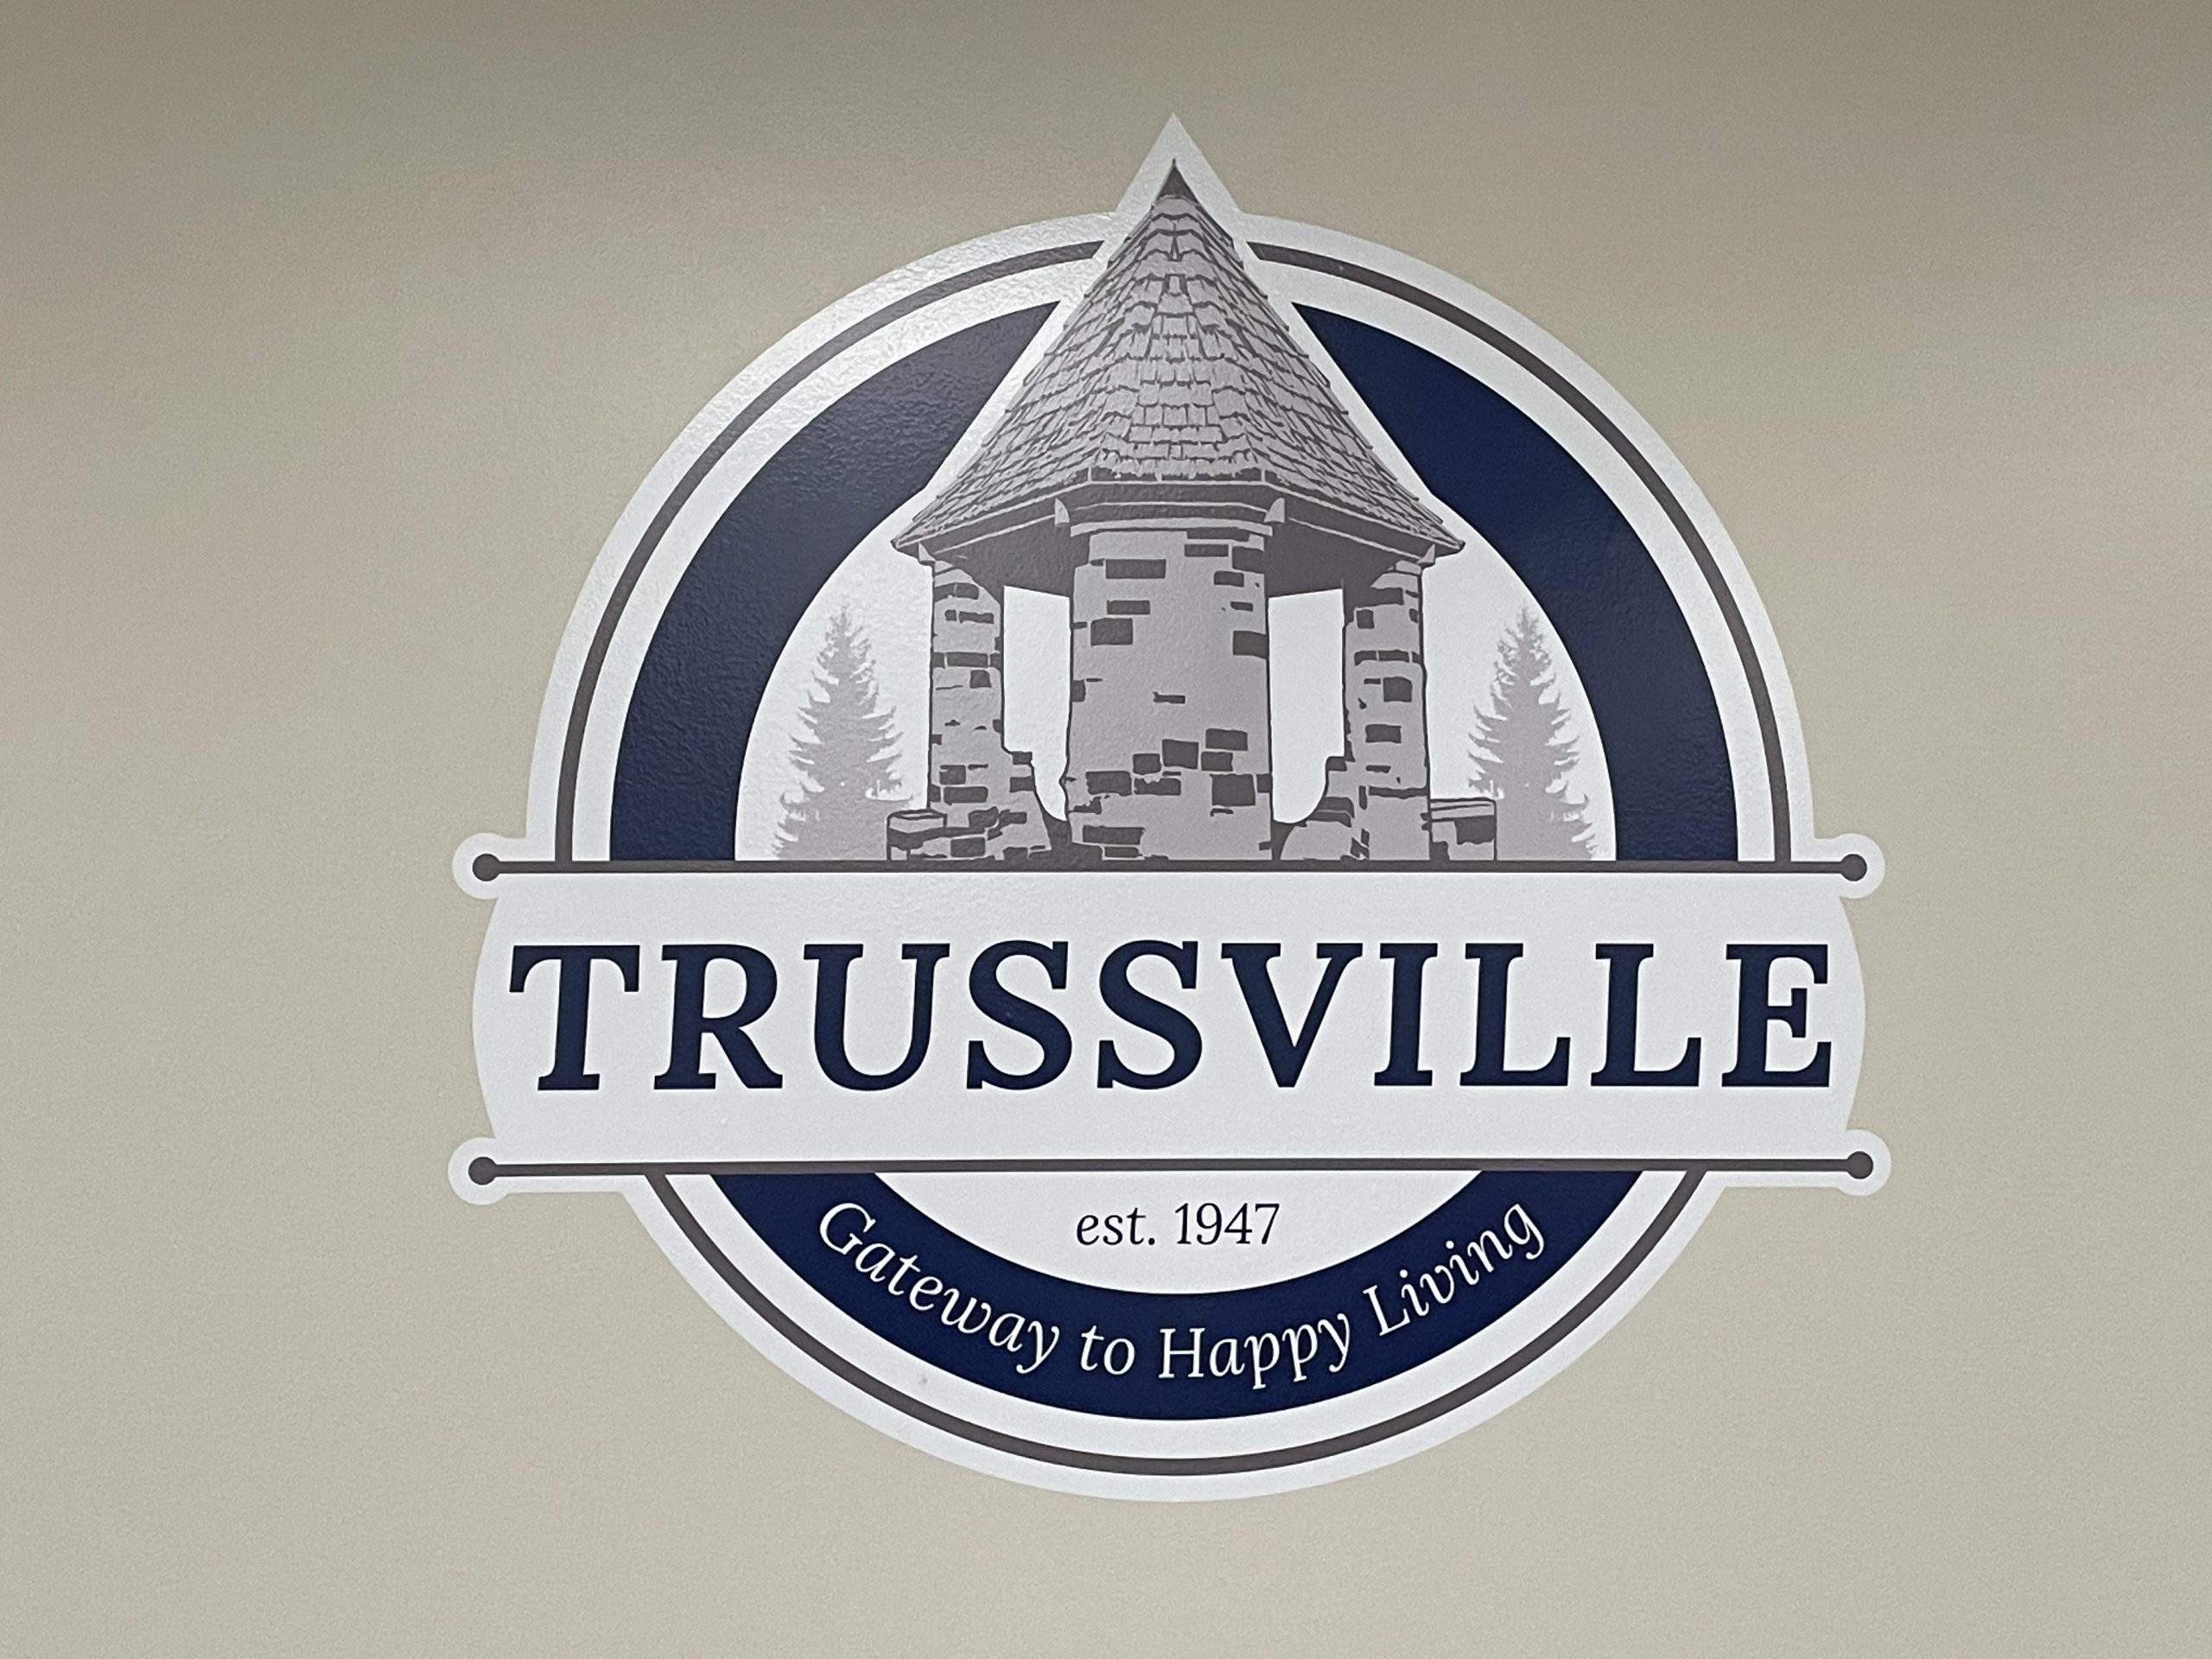 Vote on Trussville Springs delayed, council approves resolution to surplus police vehicles